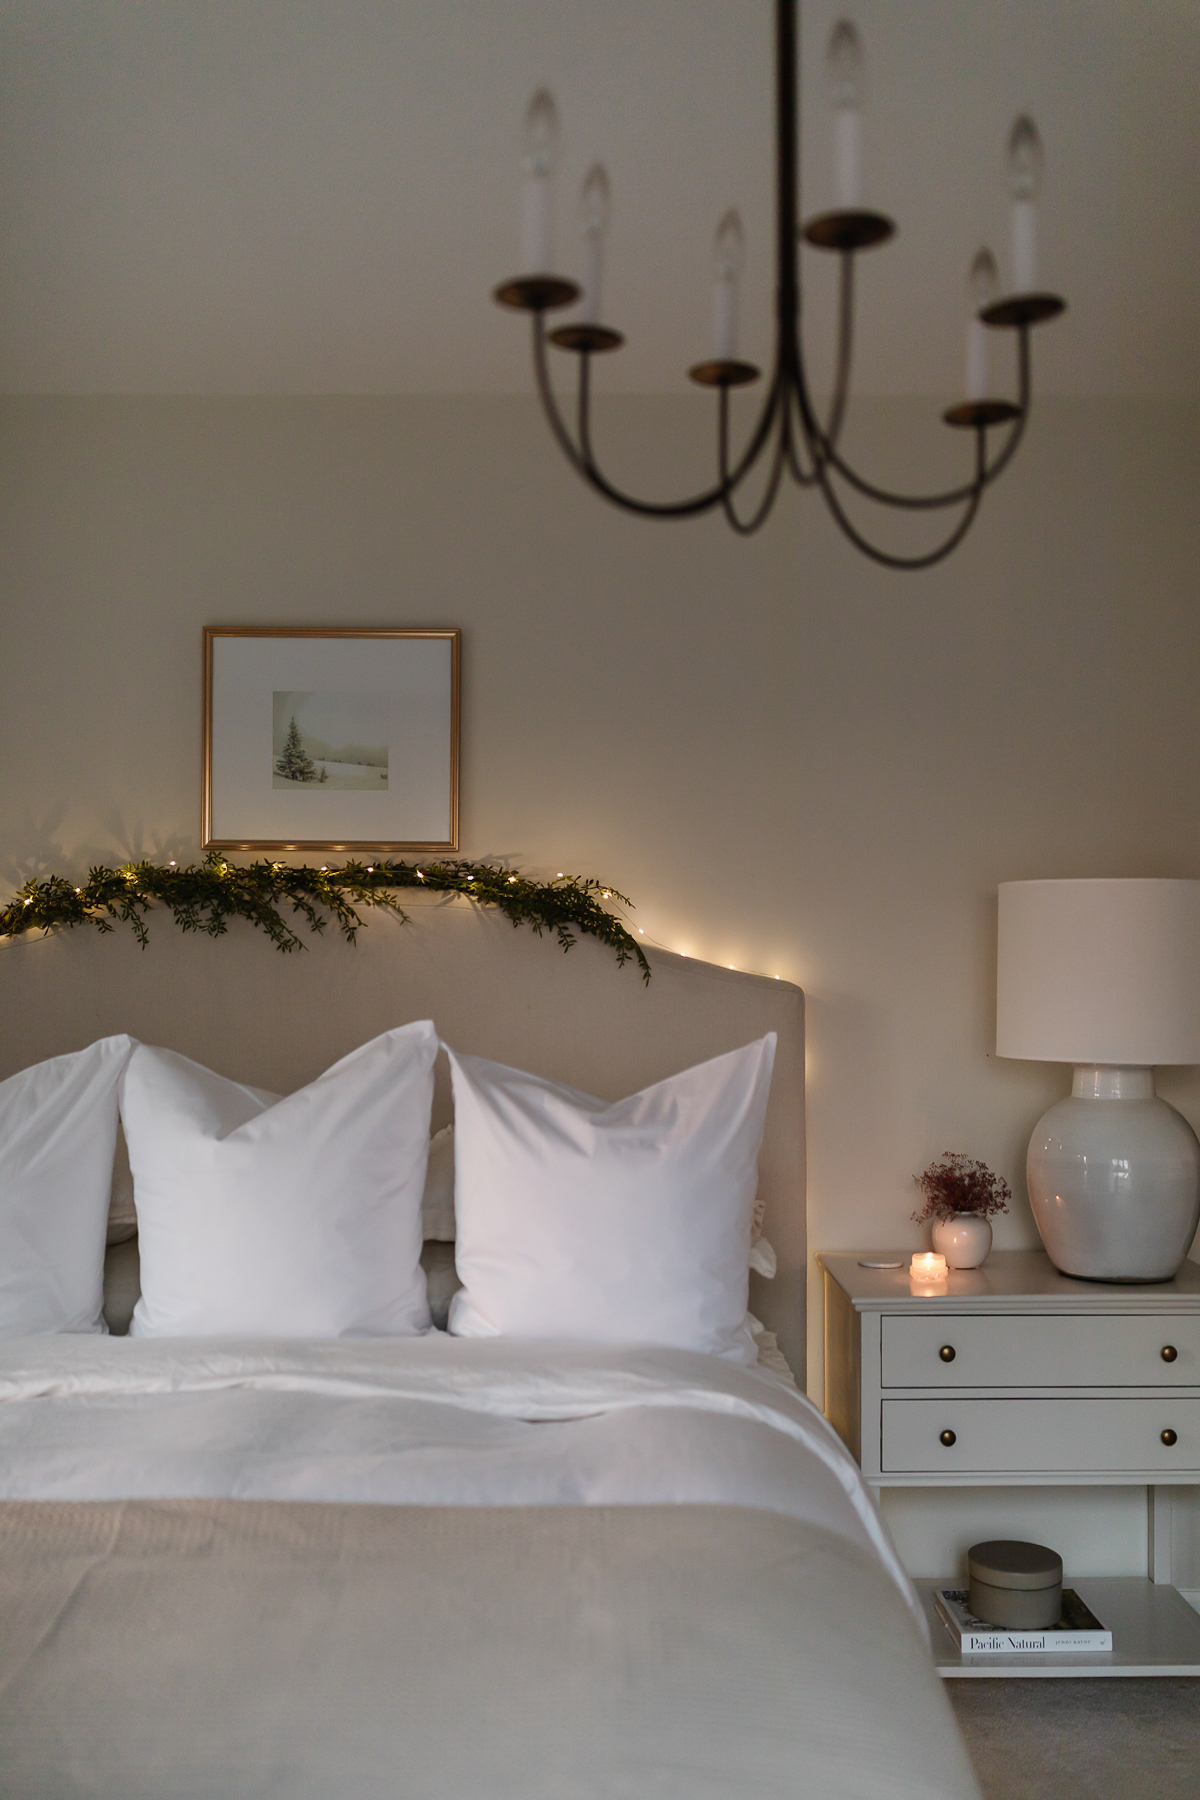 A bed adorned with white linens and a chandelier, illuminated by twinkling Christmas lights in the bedroom.